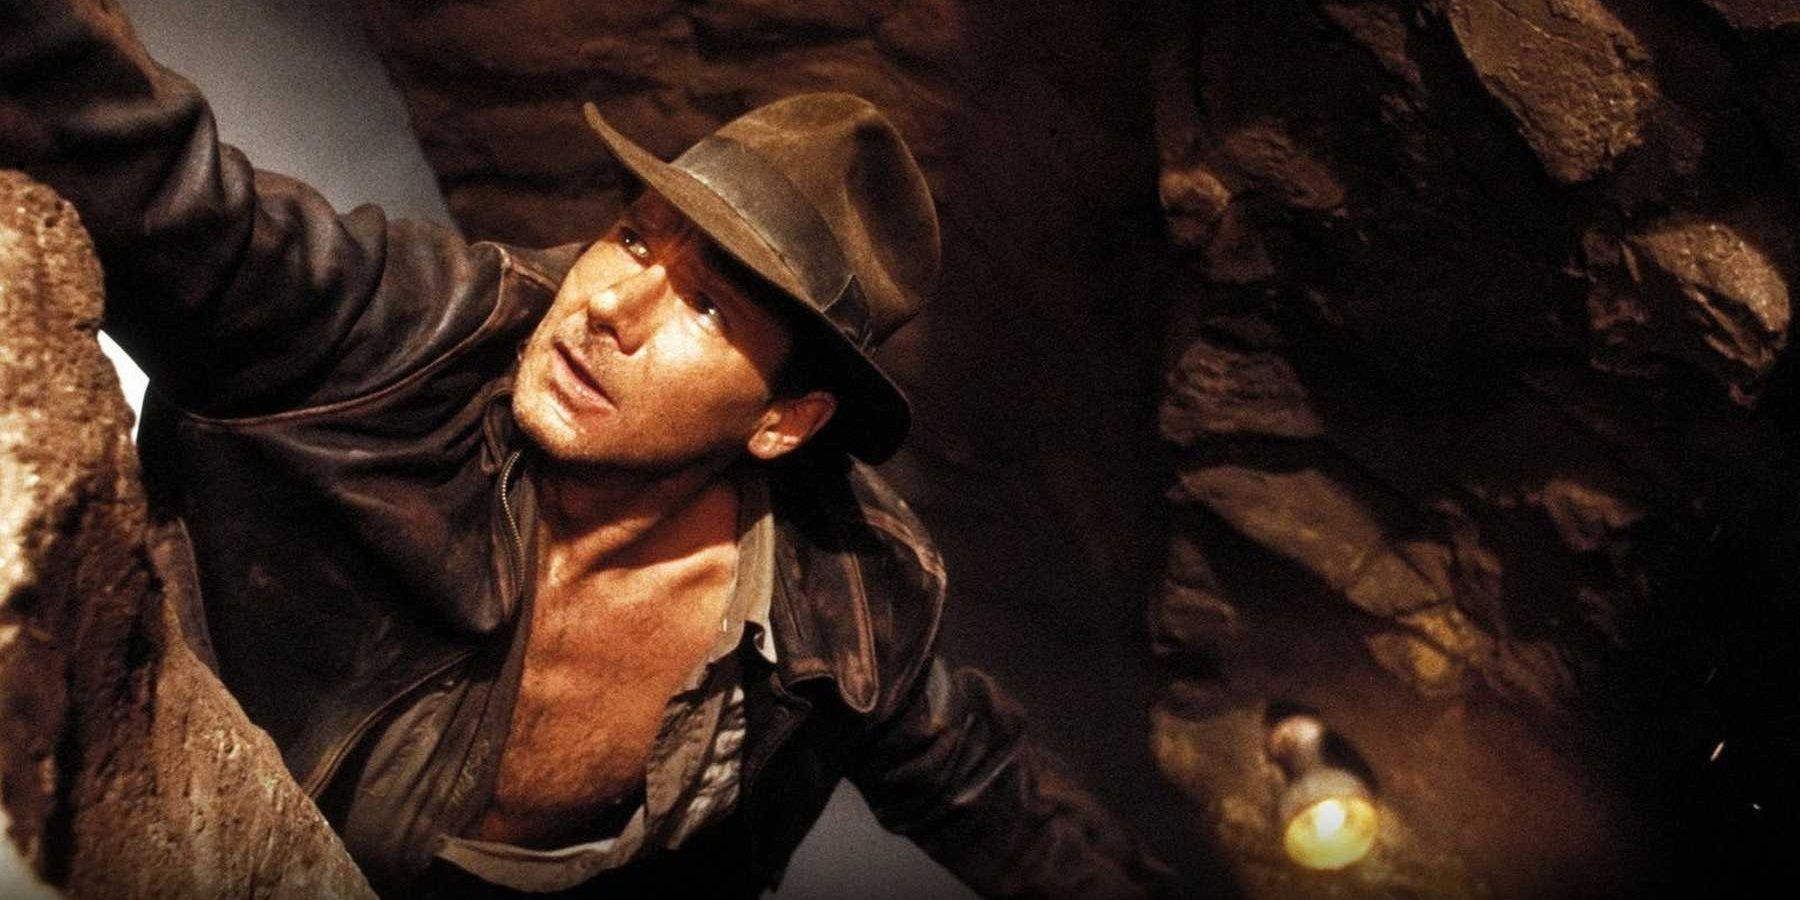 Indy reaches for the Grail in Indiana Jones and the Last Crusade